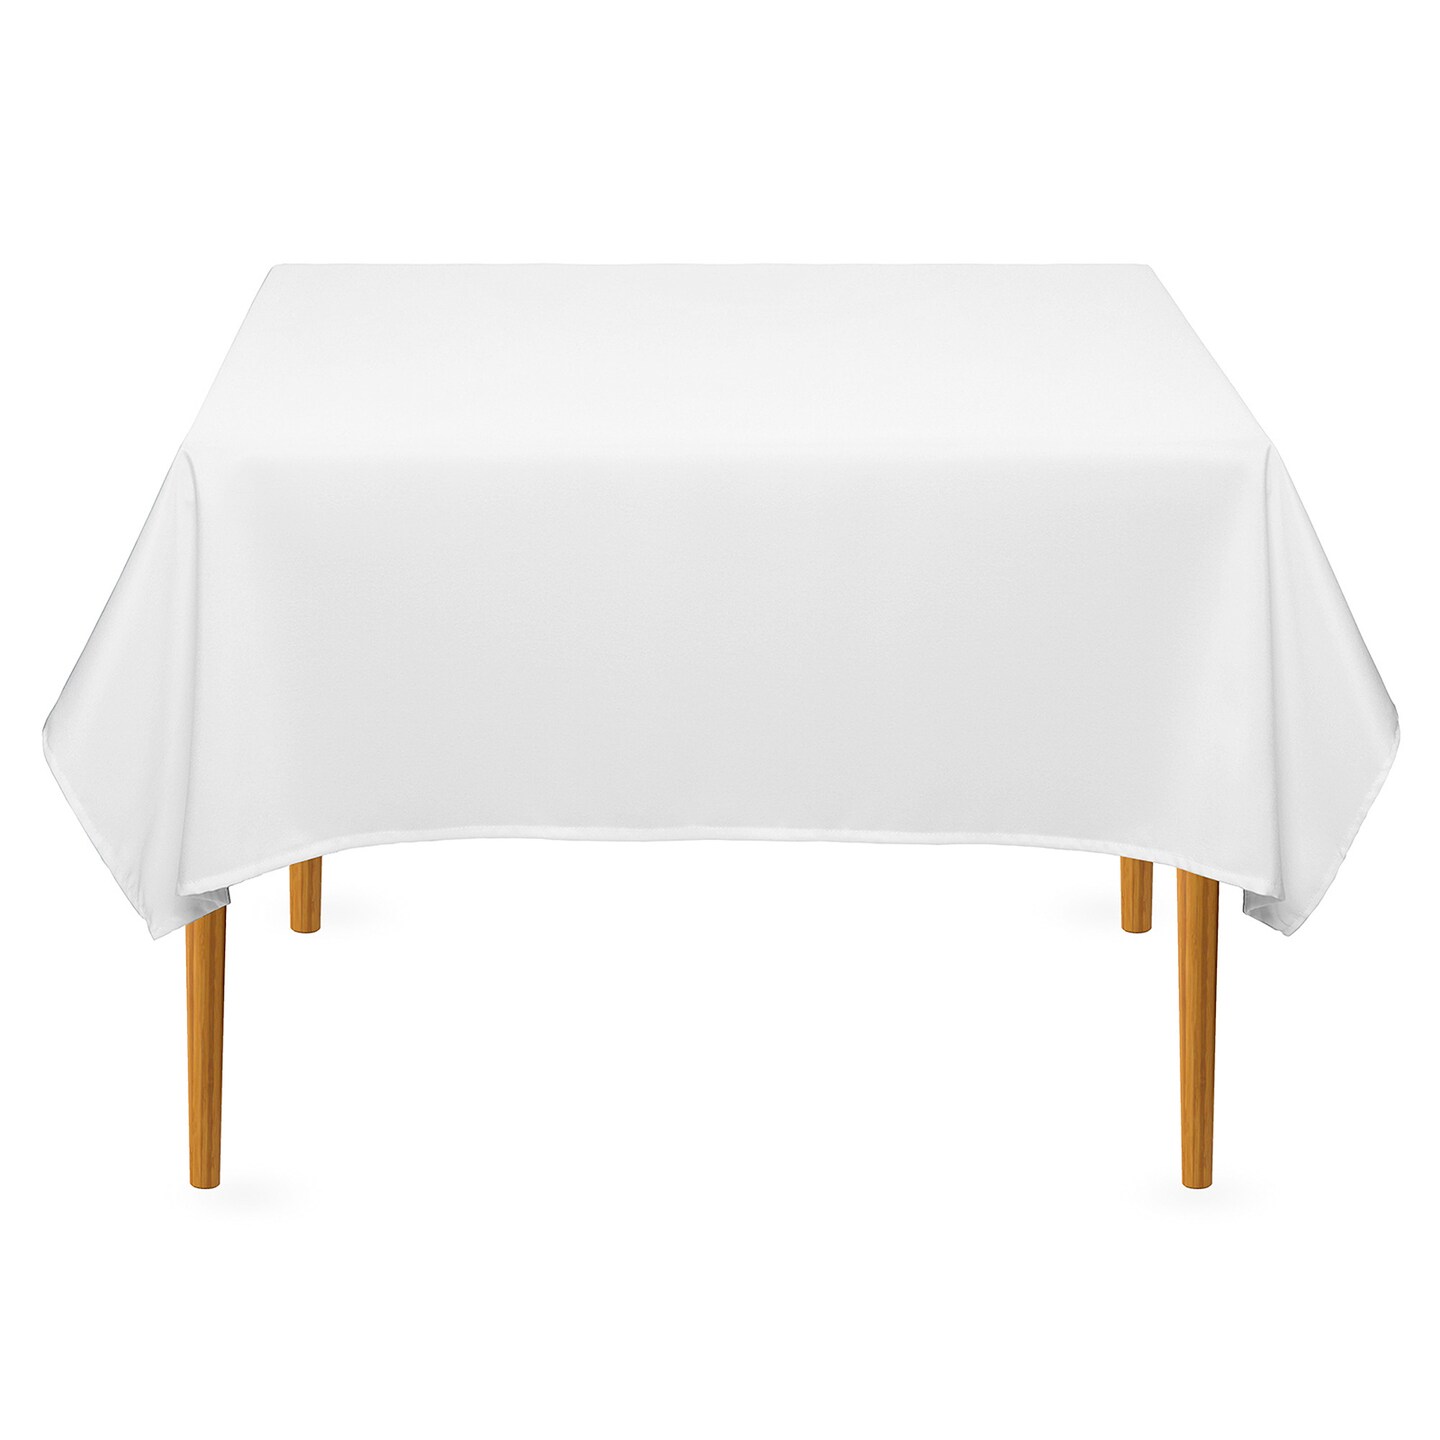 Lann&#x27;s Linens - Square Premium Tablecloth for Wedding / Banquet / Restaurant - Polyester Fabric Table Cloth